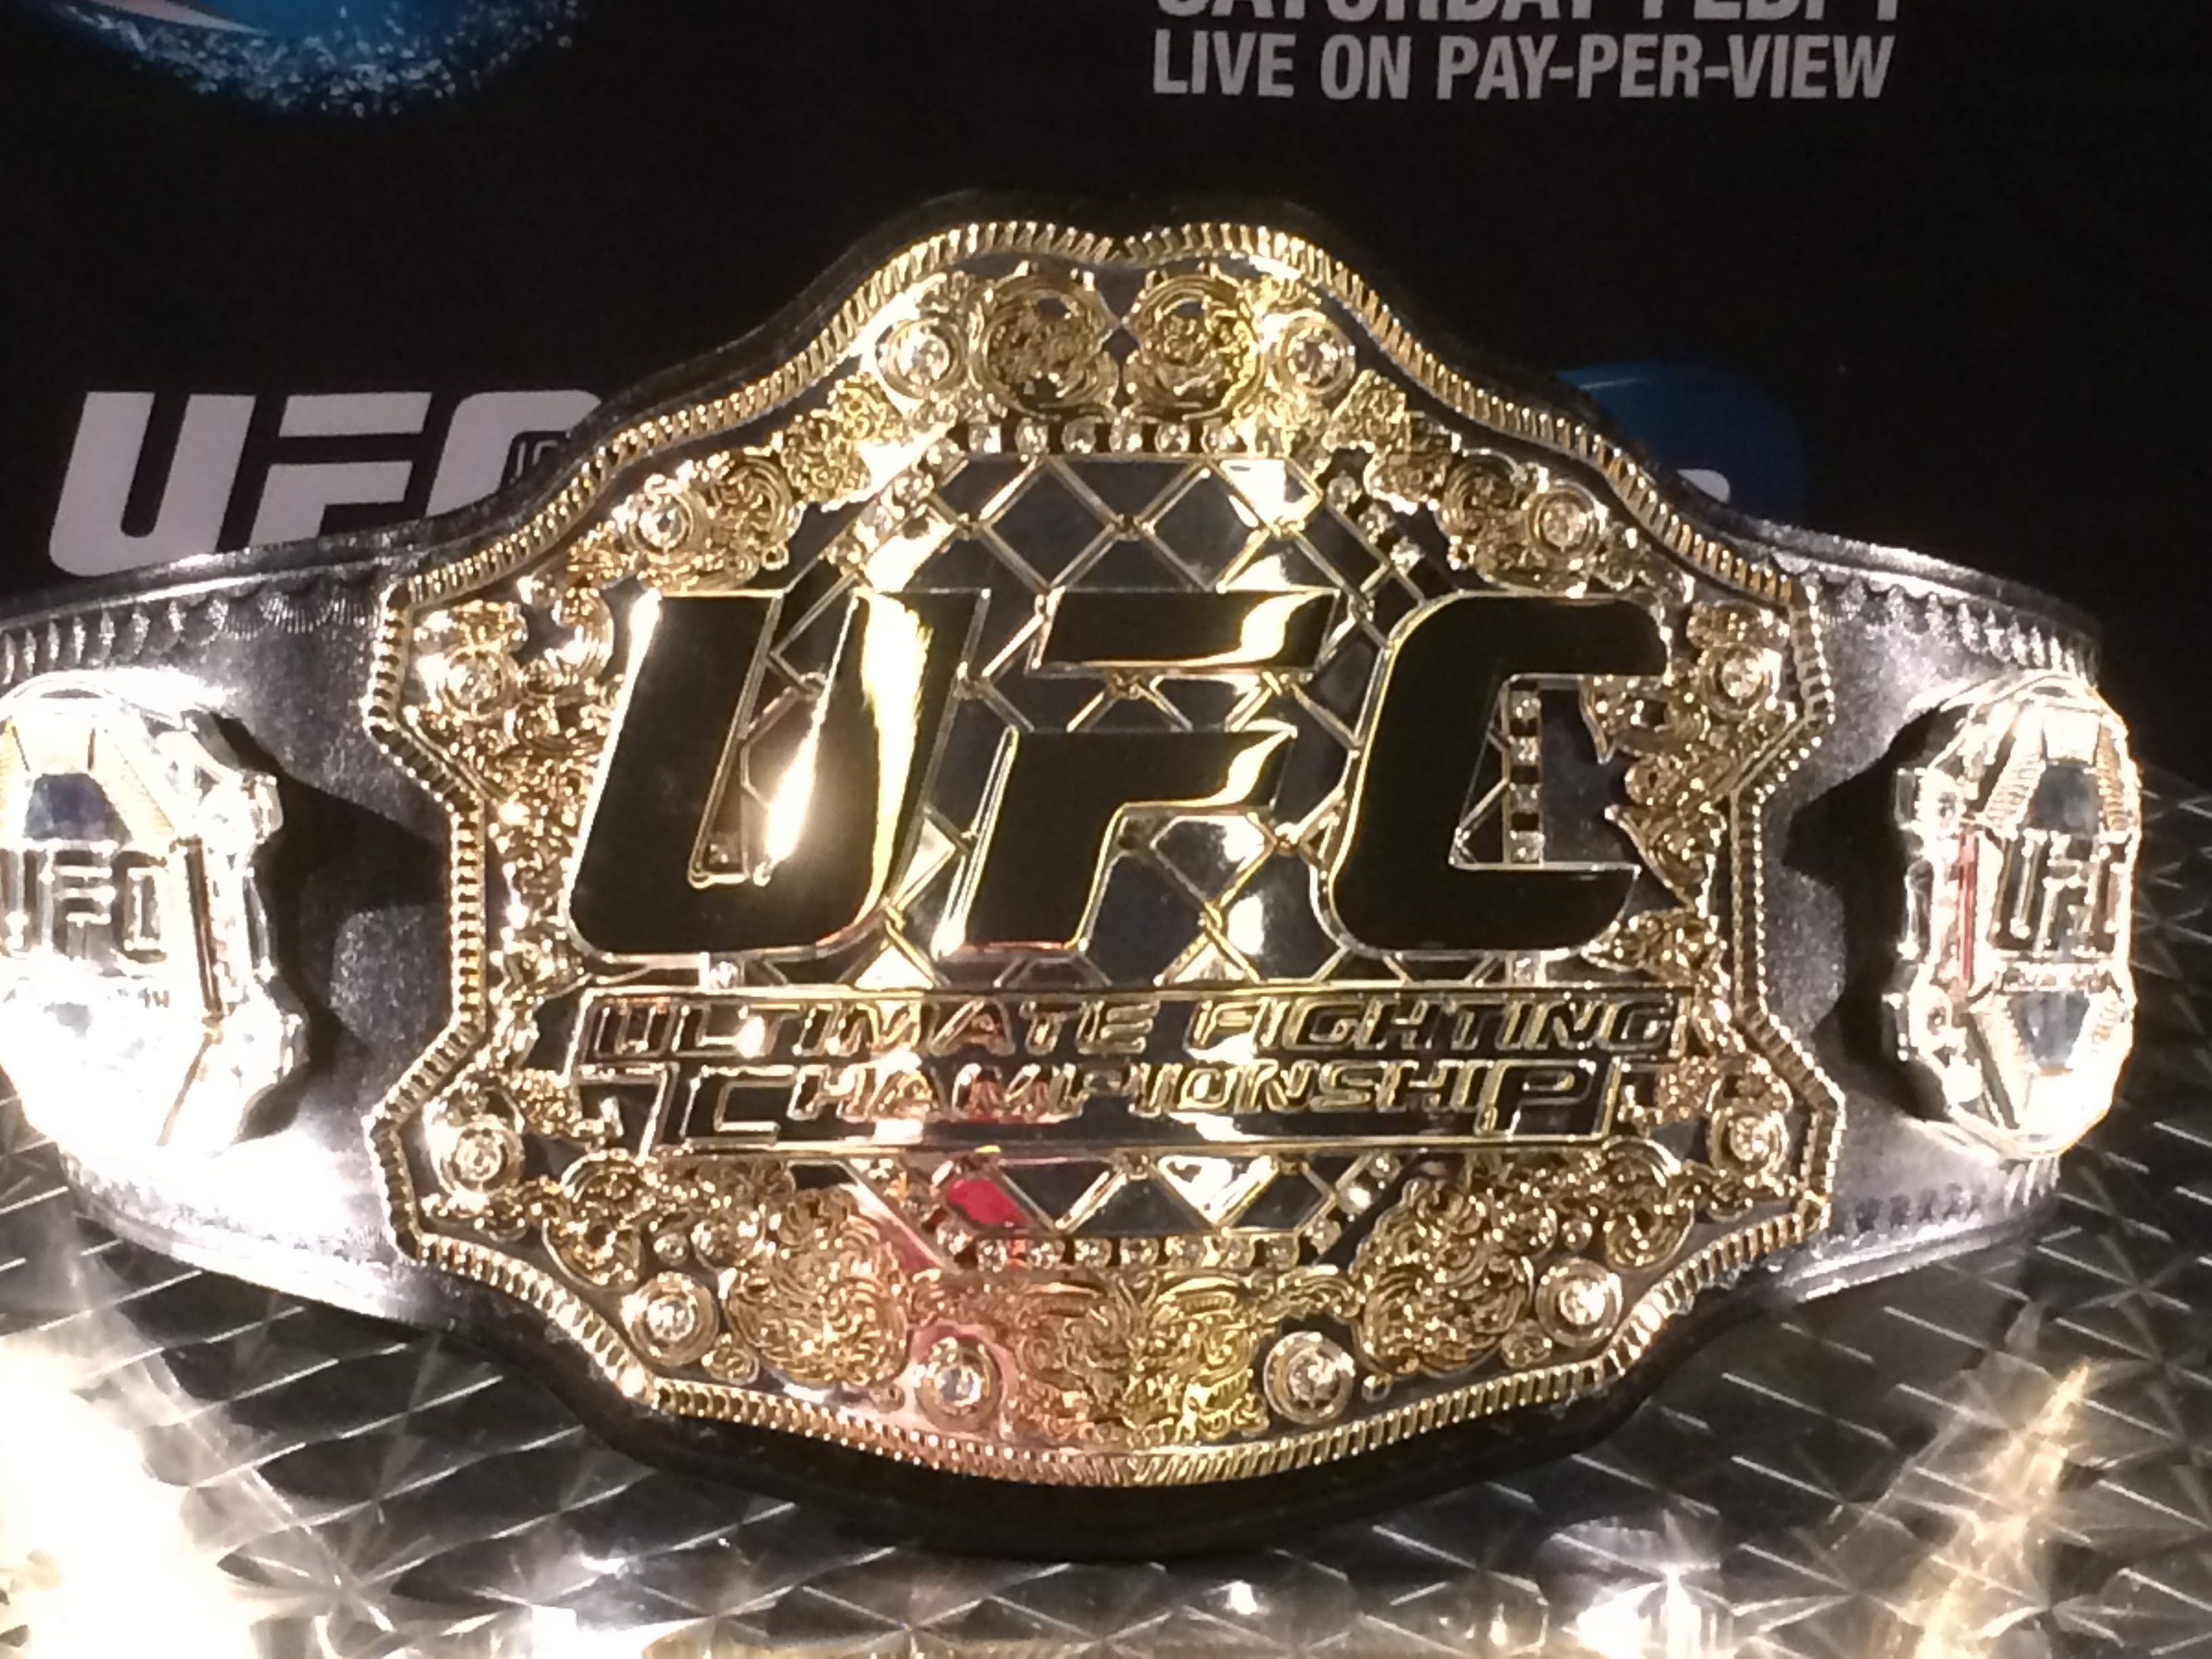 A Cowboy, a Dominator, and a Notorious One Steal Show at UFC 178